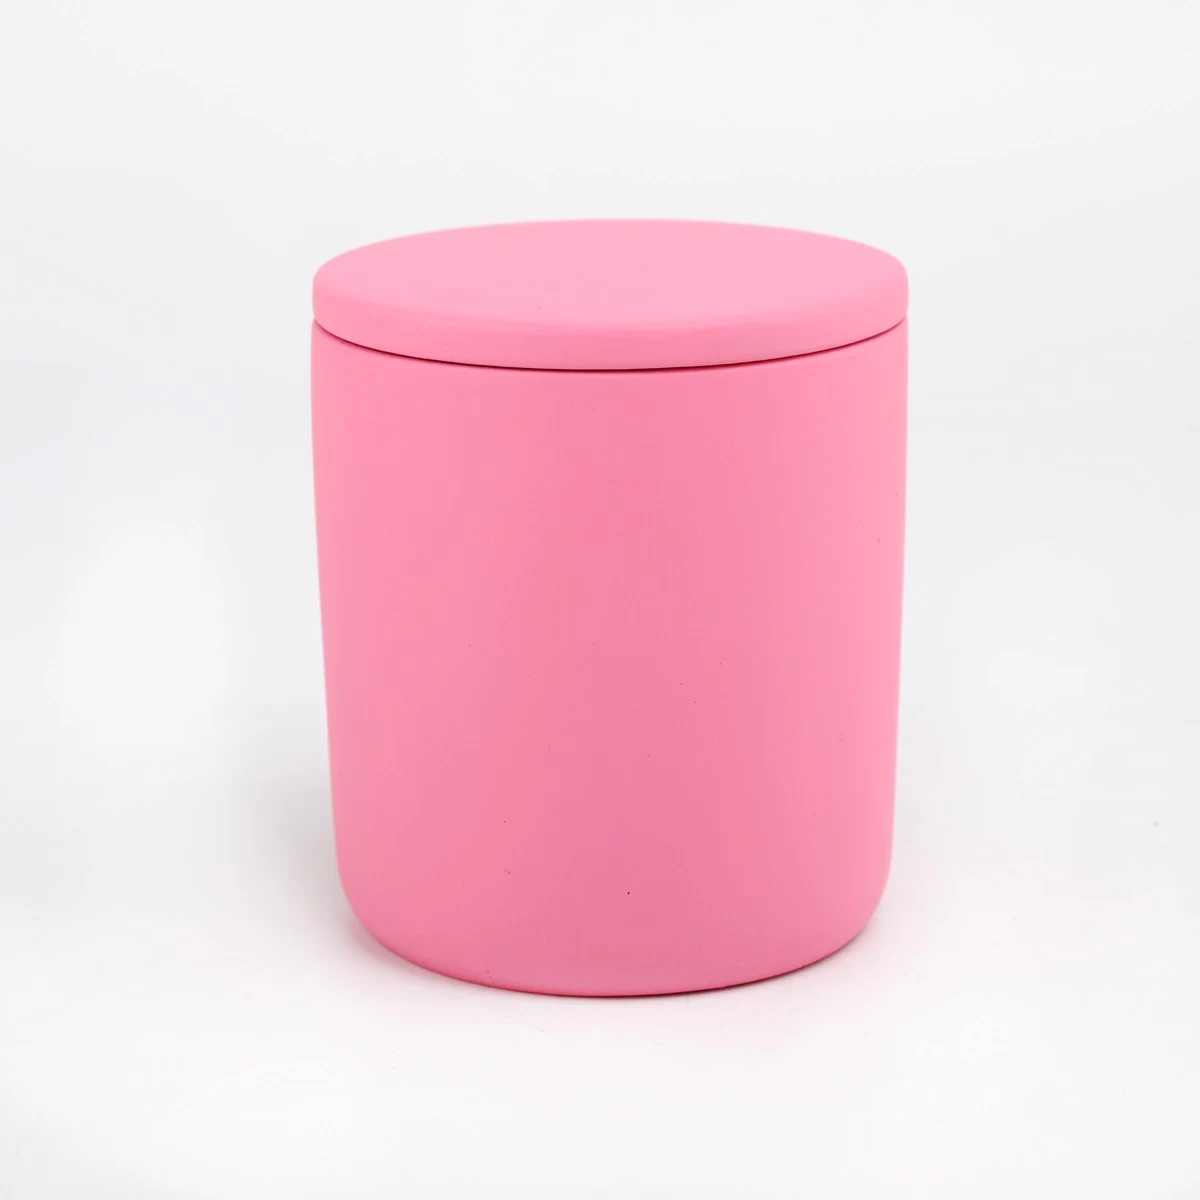 pink ceramic candle jar with lid